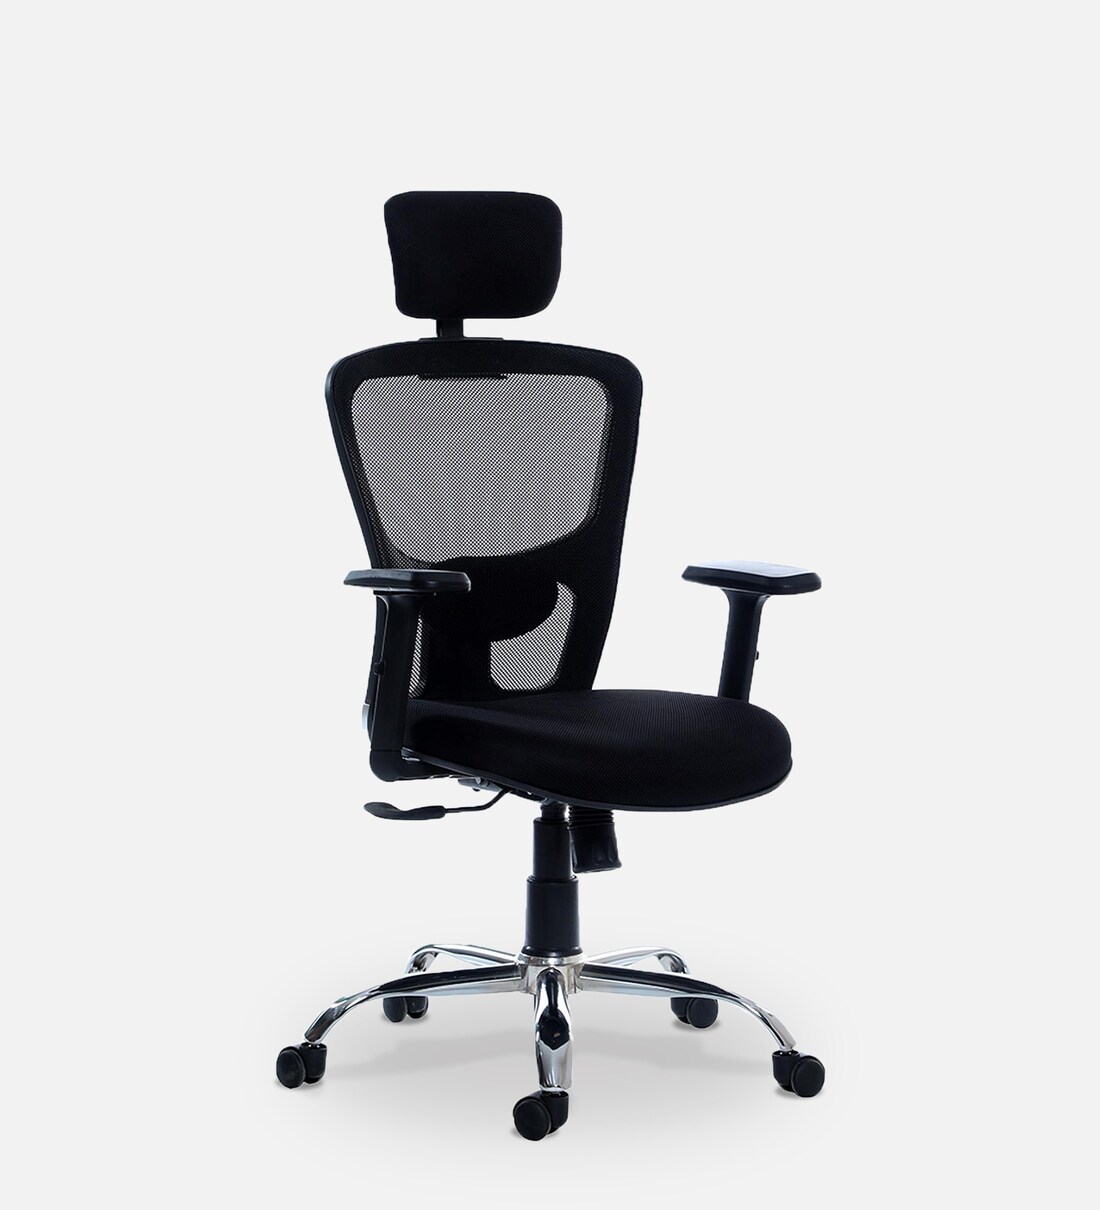 Buy Define Breathable Mesh High Back Office Chairs in Black Colour Online -  Ergonomic Chairs - Ergonomic Chairs - Furniture - Pepperfry Product